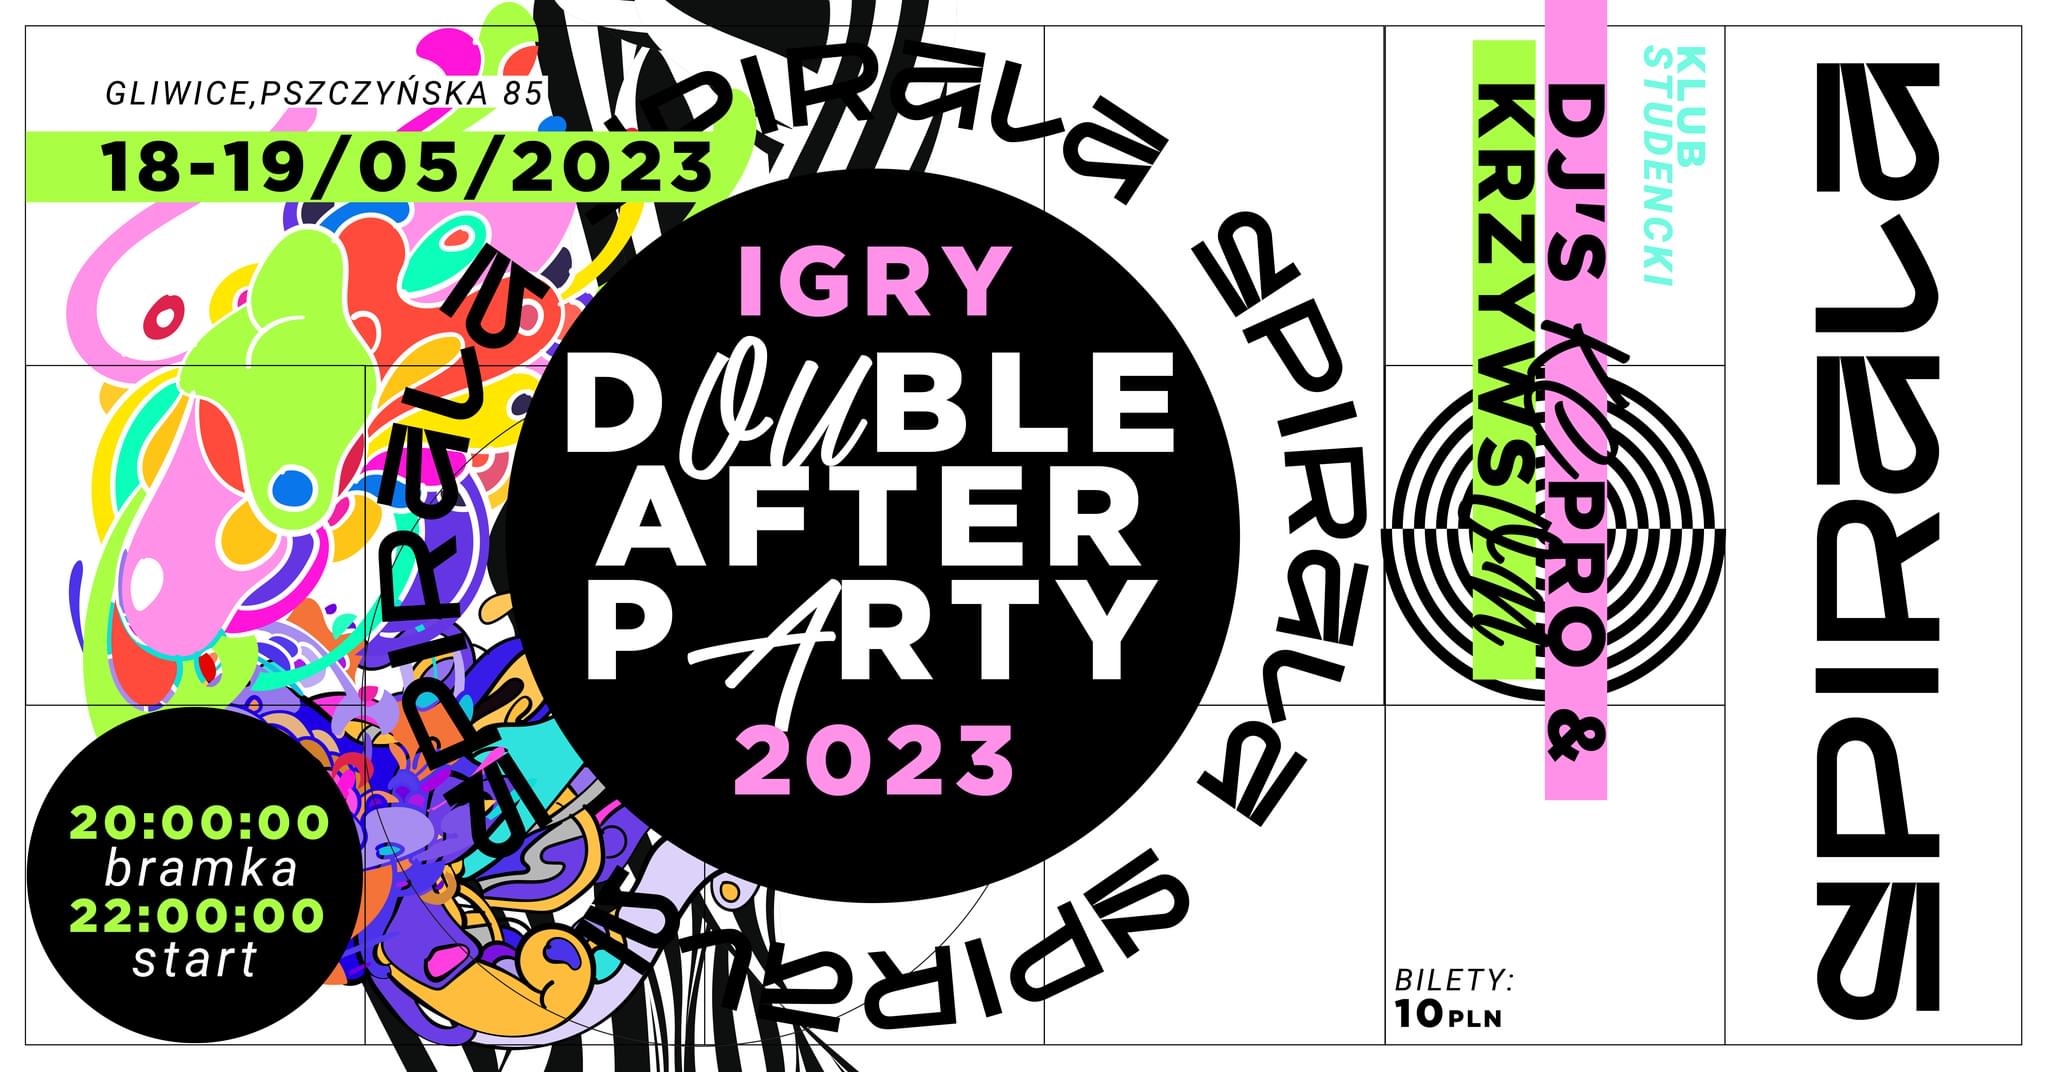 IGRY 2023 DOUBLE AFTER PARTY